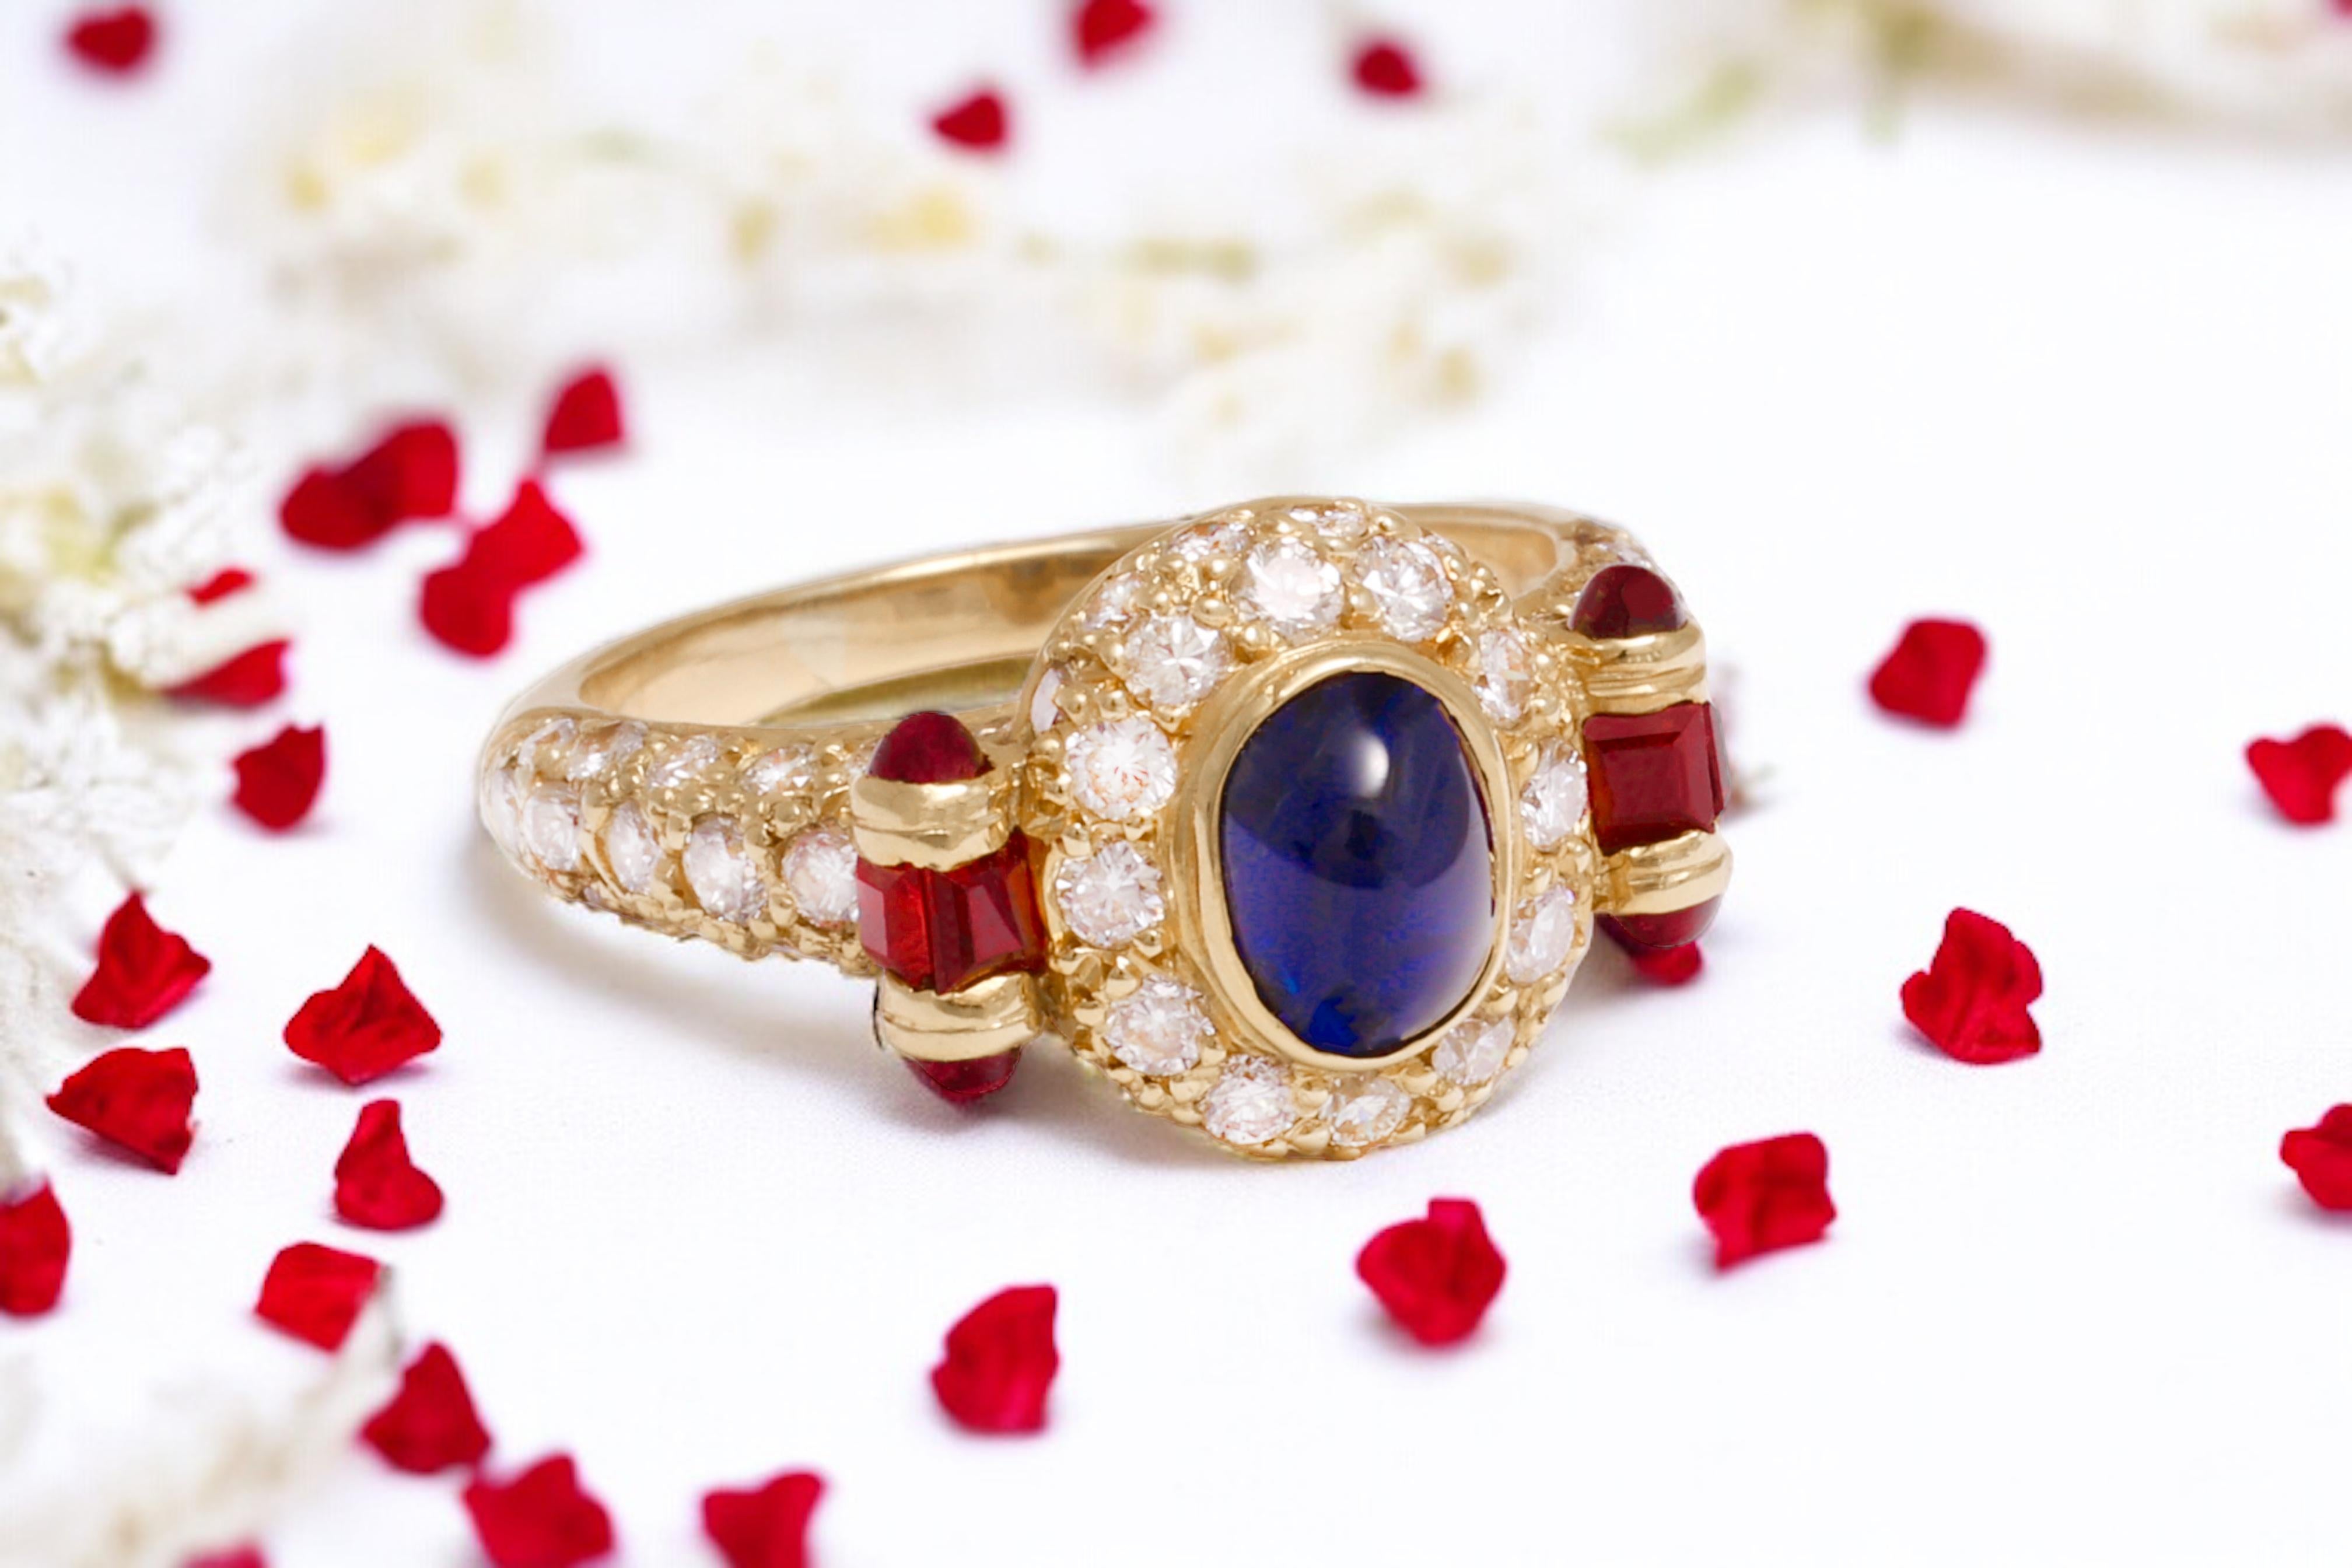  18 kt. Gold Ring With 1.20 ct. Cabochon Sapphire & Ruby & Diamond For Sale 3